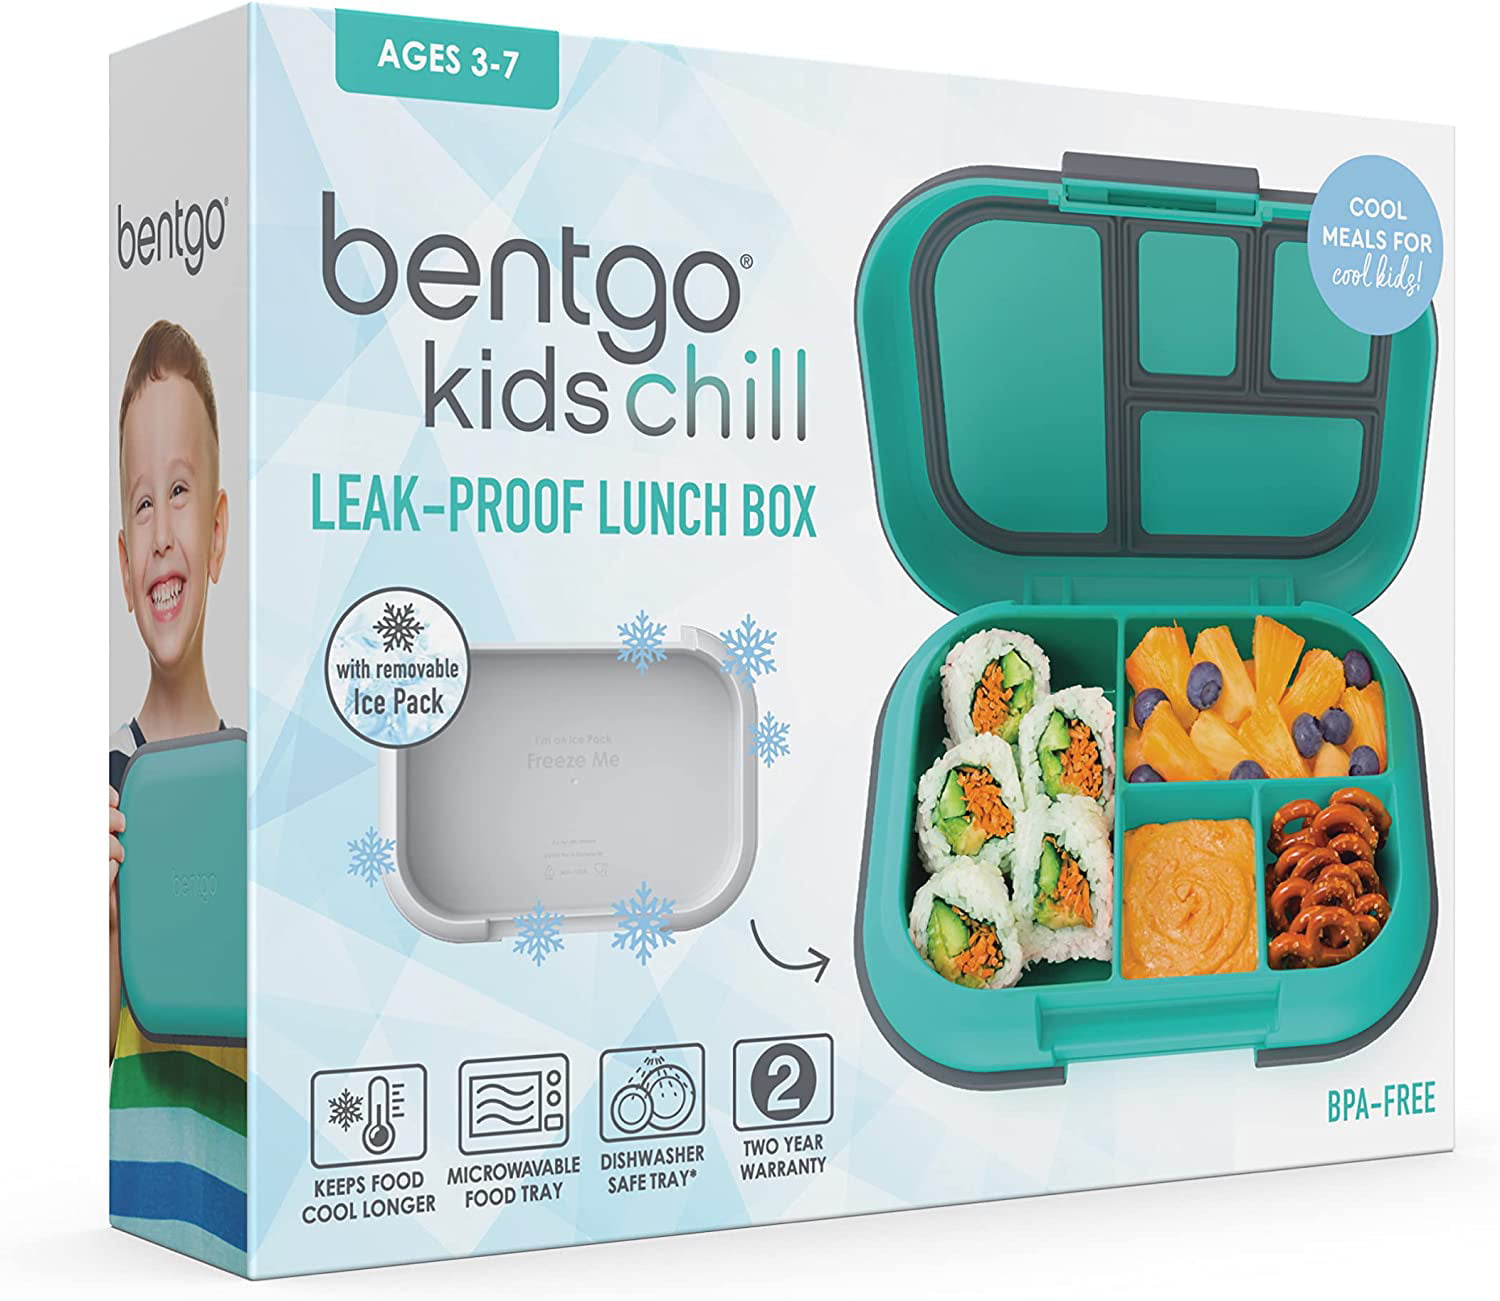 Aohea Bento Lunch Box Kids Ice Pack Keeping Cool for 4-5 Hours